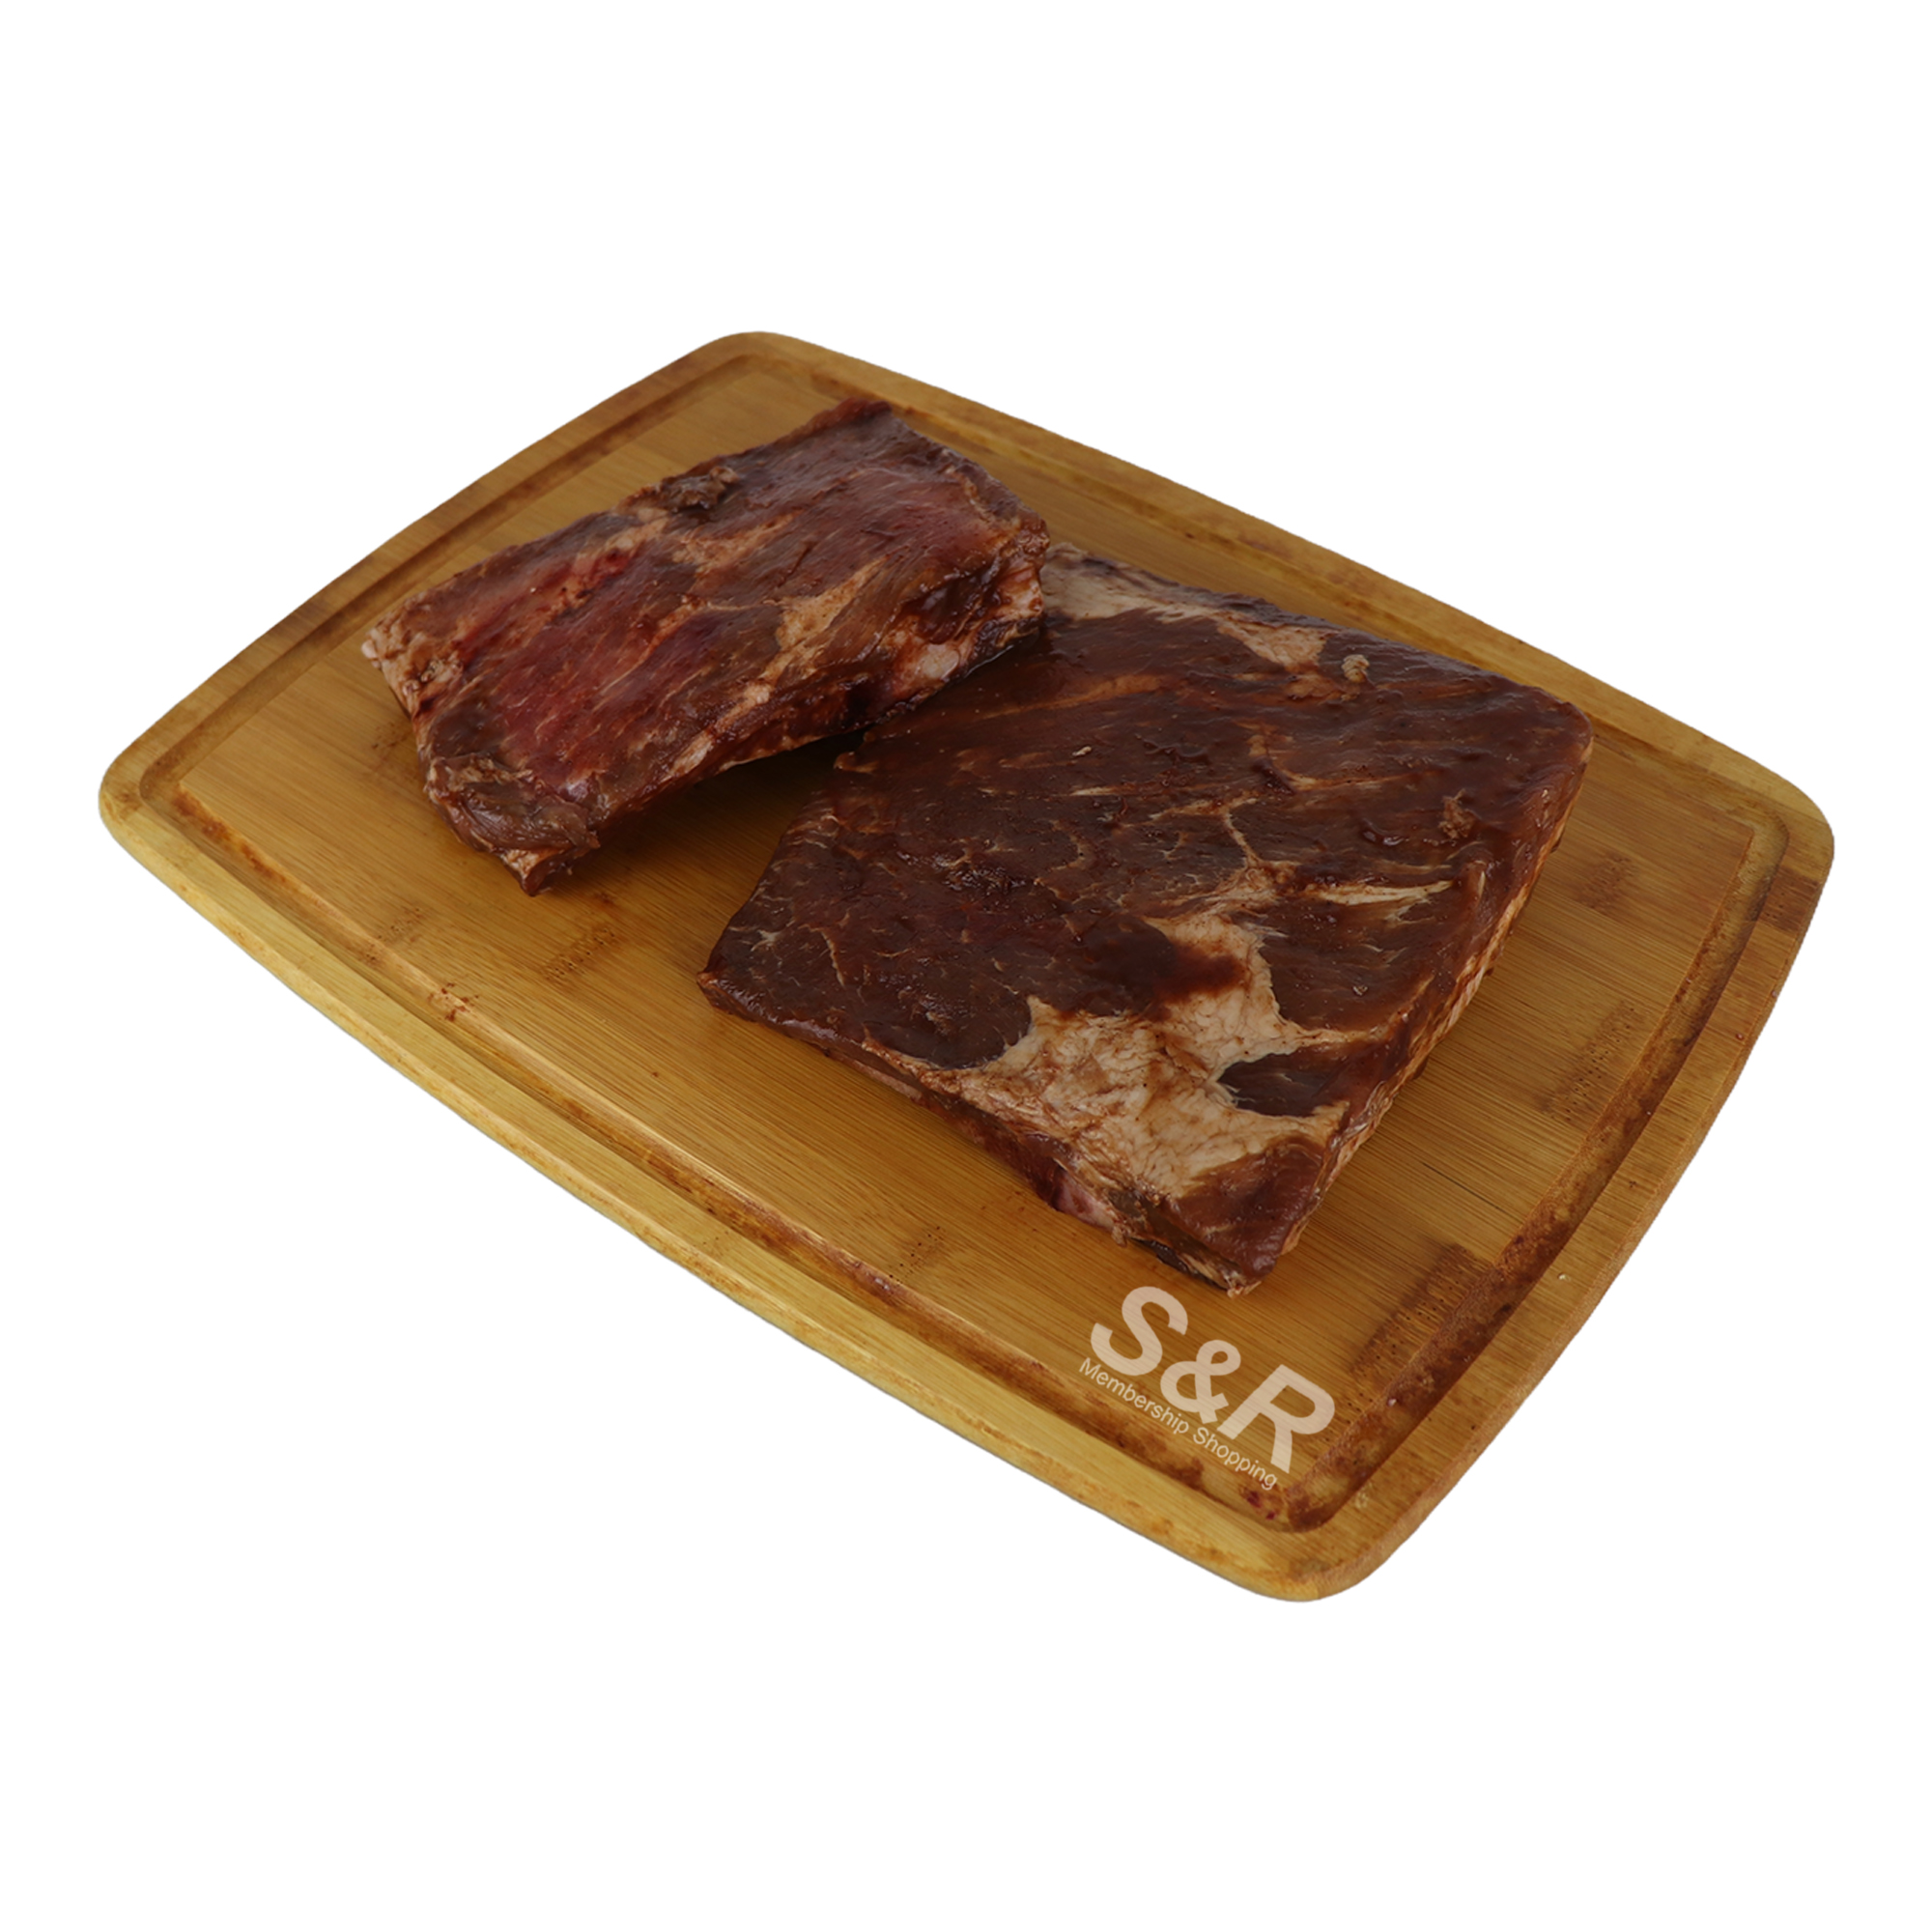 Member's Value American Baby Back BBQ Ribs Approx 2kg